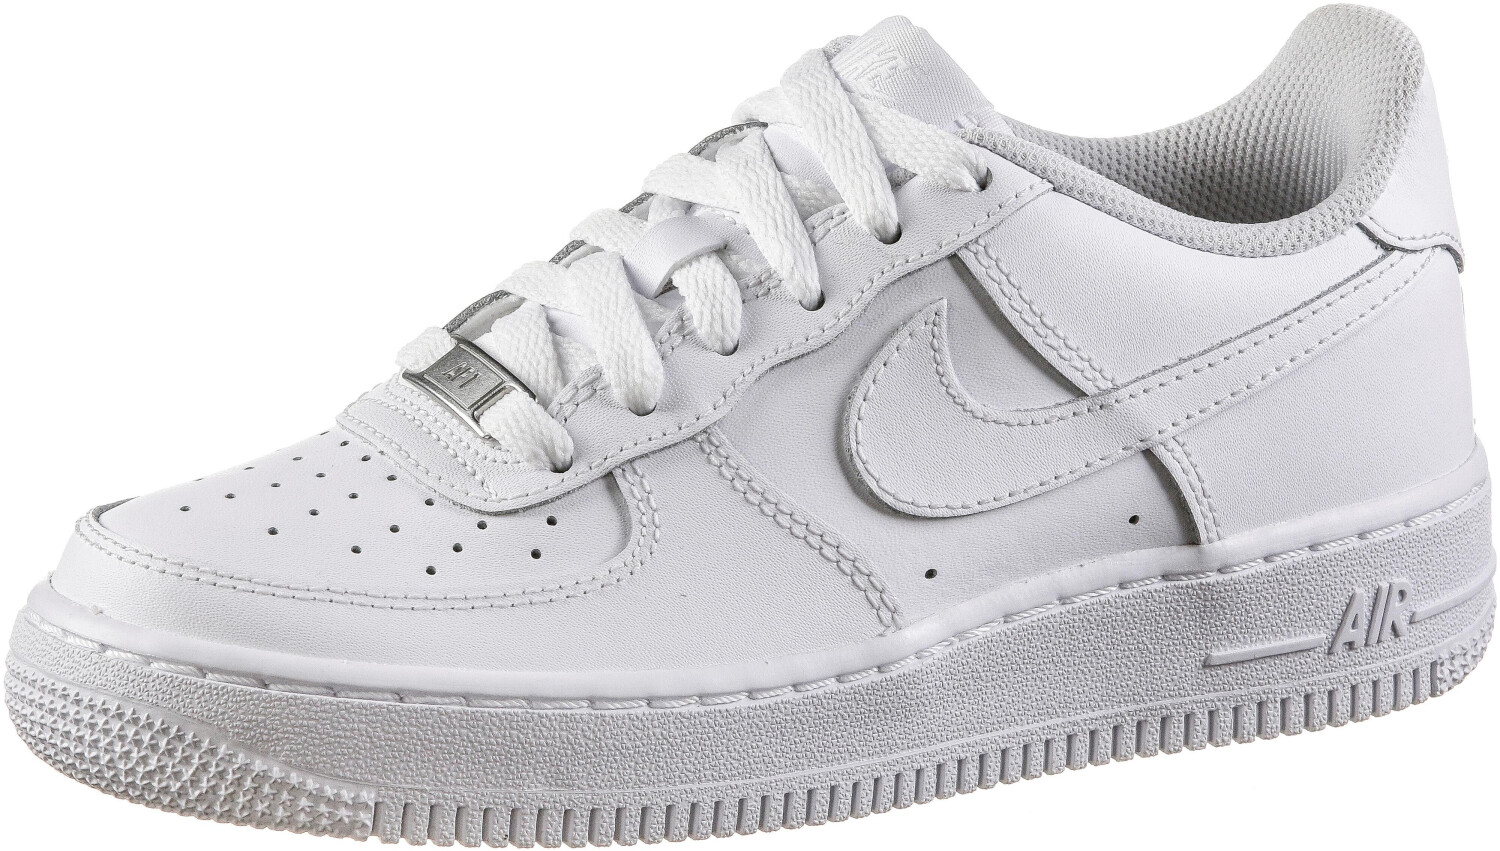 Nike Air Force 1 LV8 3 (GS) Big Kids Basketball Shoes Size 6 